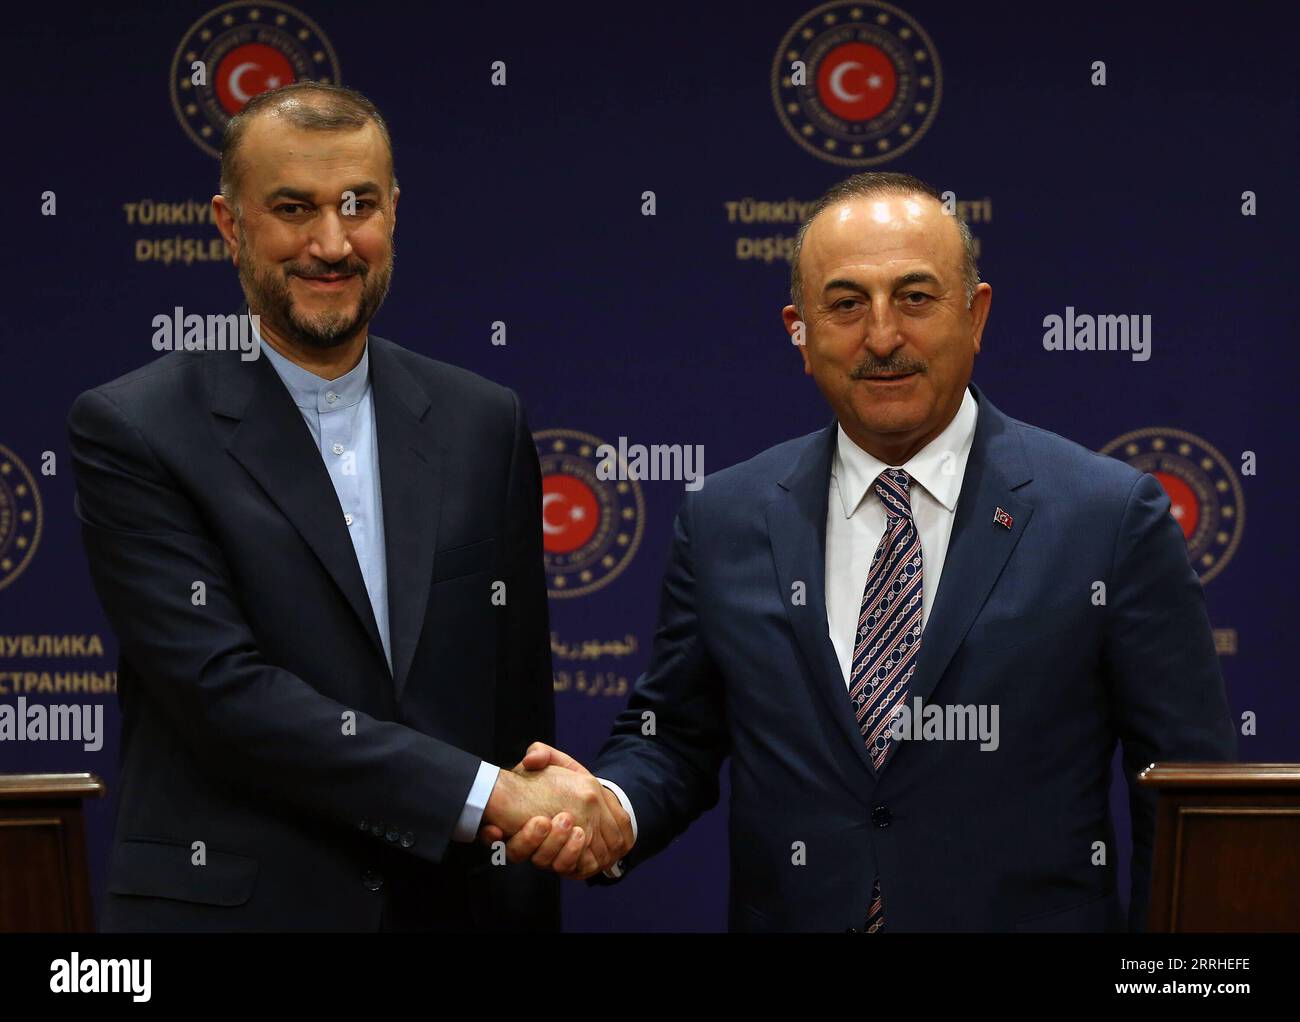 News Bilder des Tages 220627 -- ANKARA, June 27, 2022 -- Turkish Foreign Minister Mevlut Cavusoglu R and Iranian Foreign Minister Hossein Amir-Abdollahian shake hands at a joint press conference in Ankara, Turkey, on June 27, 2022. Turkey is against the unilateral sanctions on Iran, Turkish Foreign Minister Mevlut Cavusoglu said on Monday, voicing hopes for the nuclear deal to be restored. Photo by /Xinhua TURKEY-ANKARA-IRAN-FM-VISIT MustafaxKaya PUBLICATIONxNOTxINxCHN Stock Photo